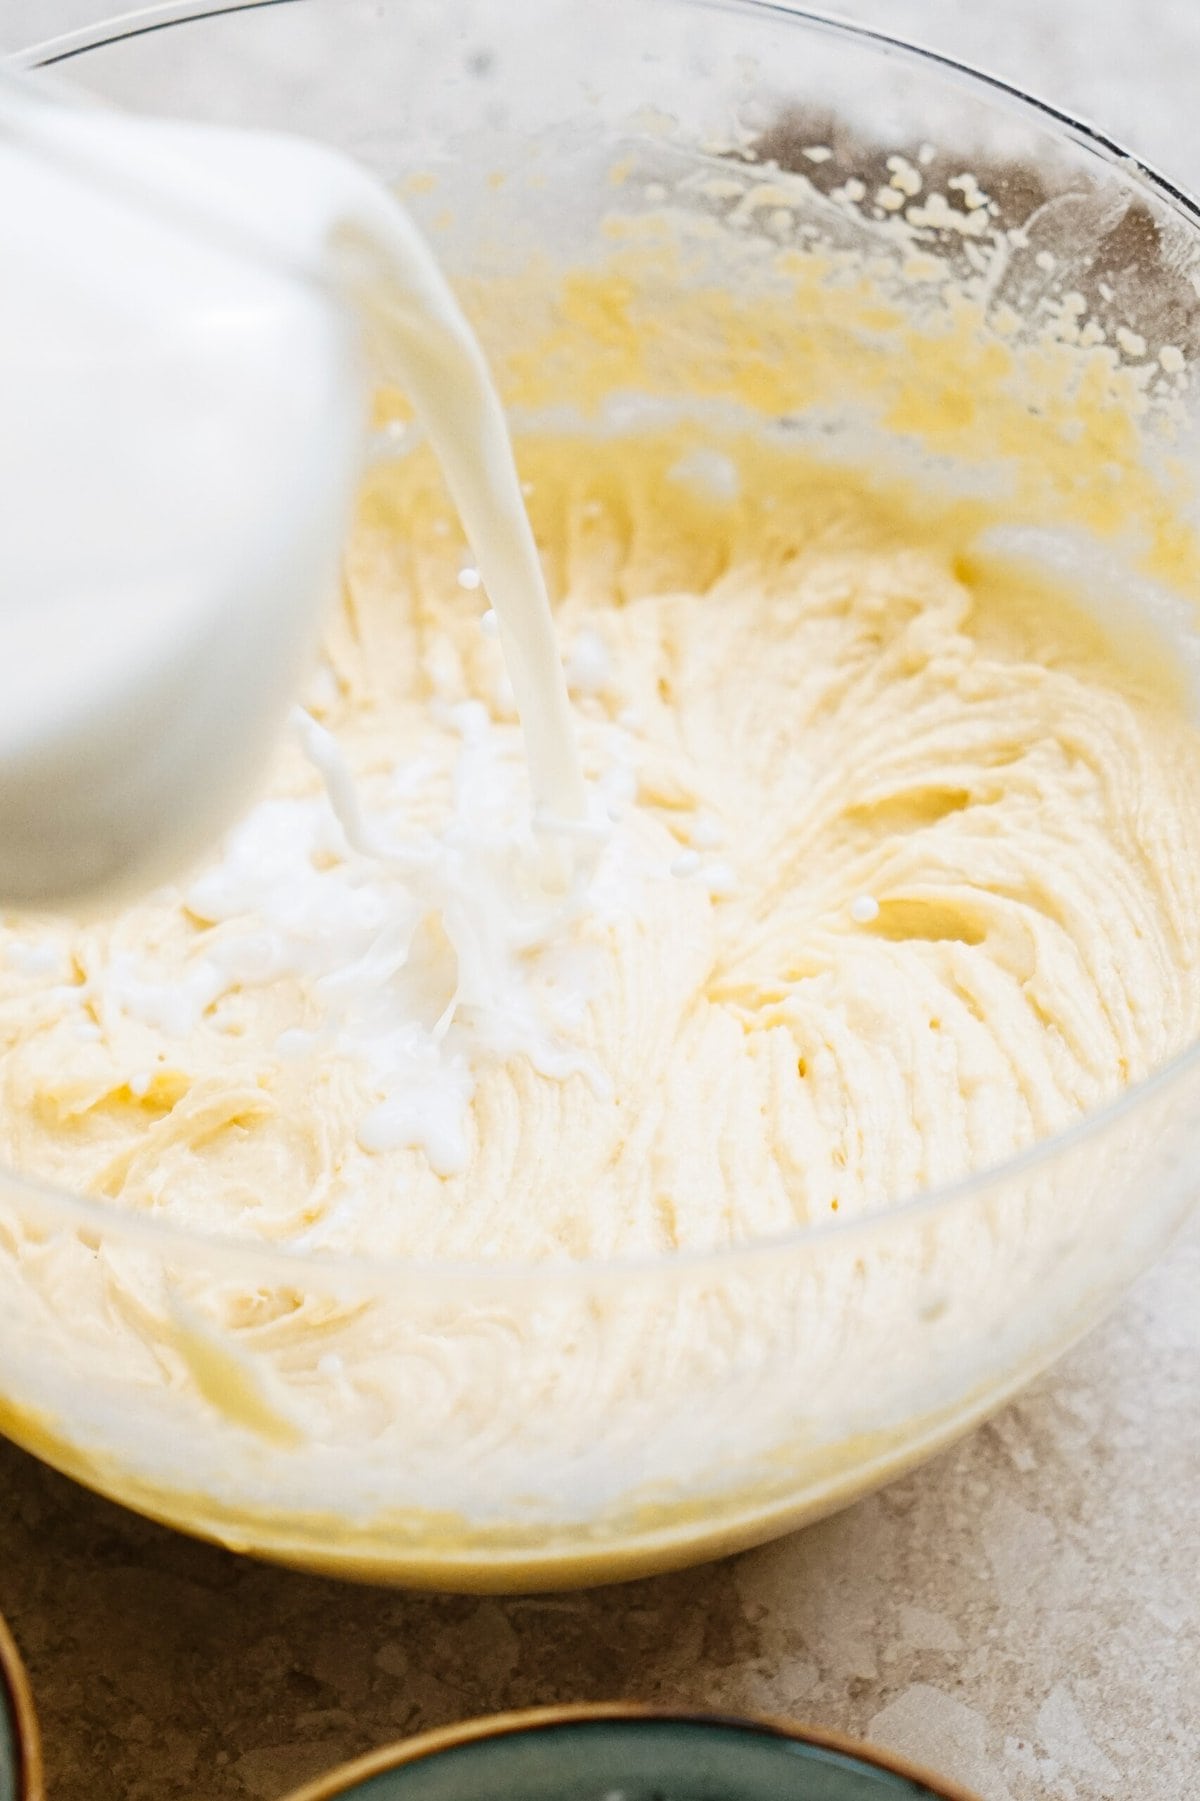 Milk being poured into a mixing bowl containing a yellow batter.